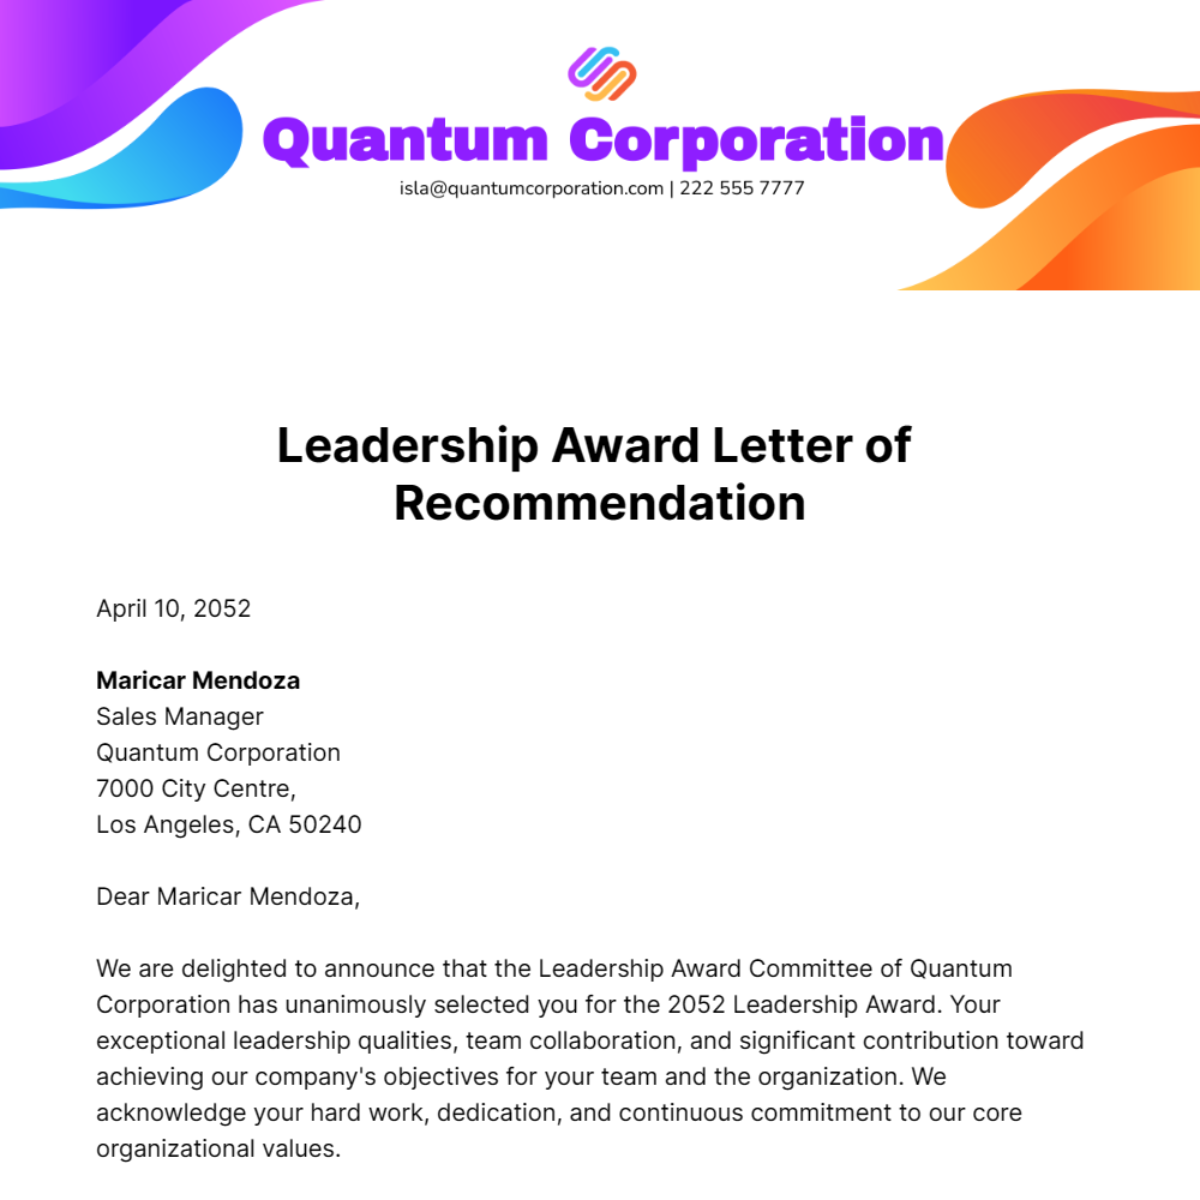 Leadership Award Letter of Recommendation Template